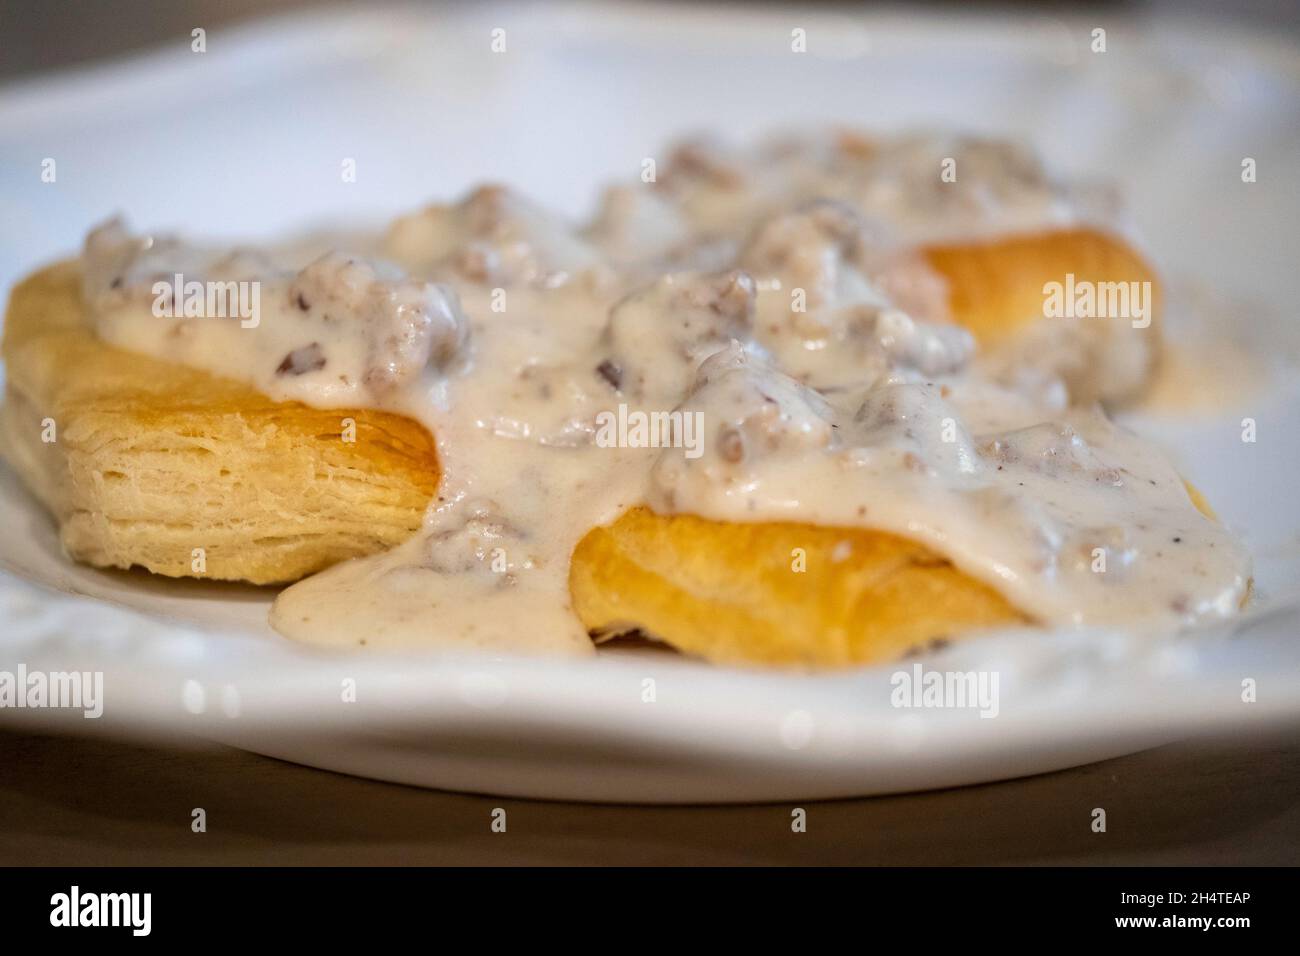 Peppered milk gravy with pork sausage over biscuits on a white plate. Stock Photo